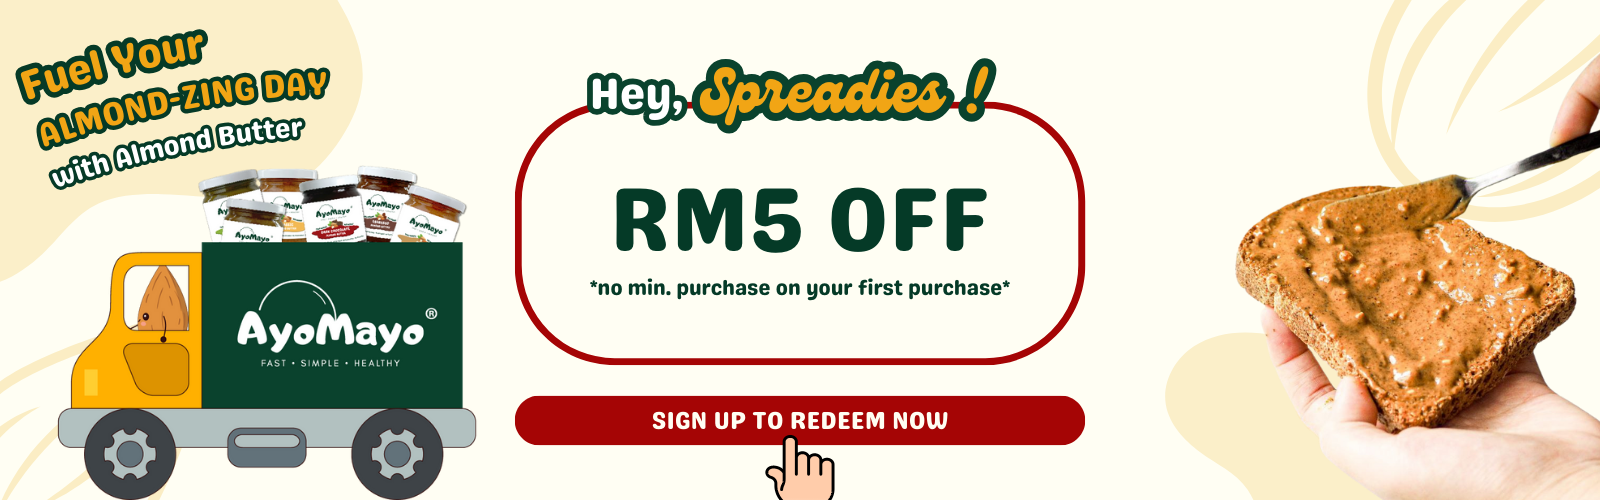 sign up for RM5 OFF